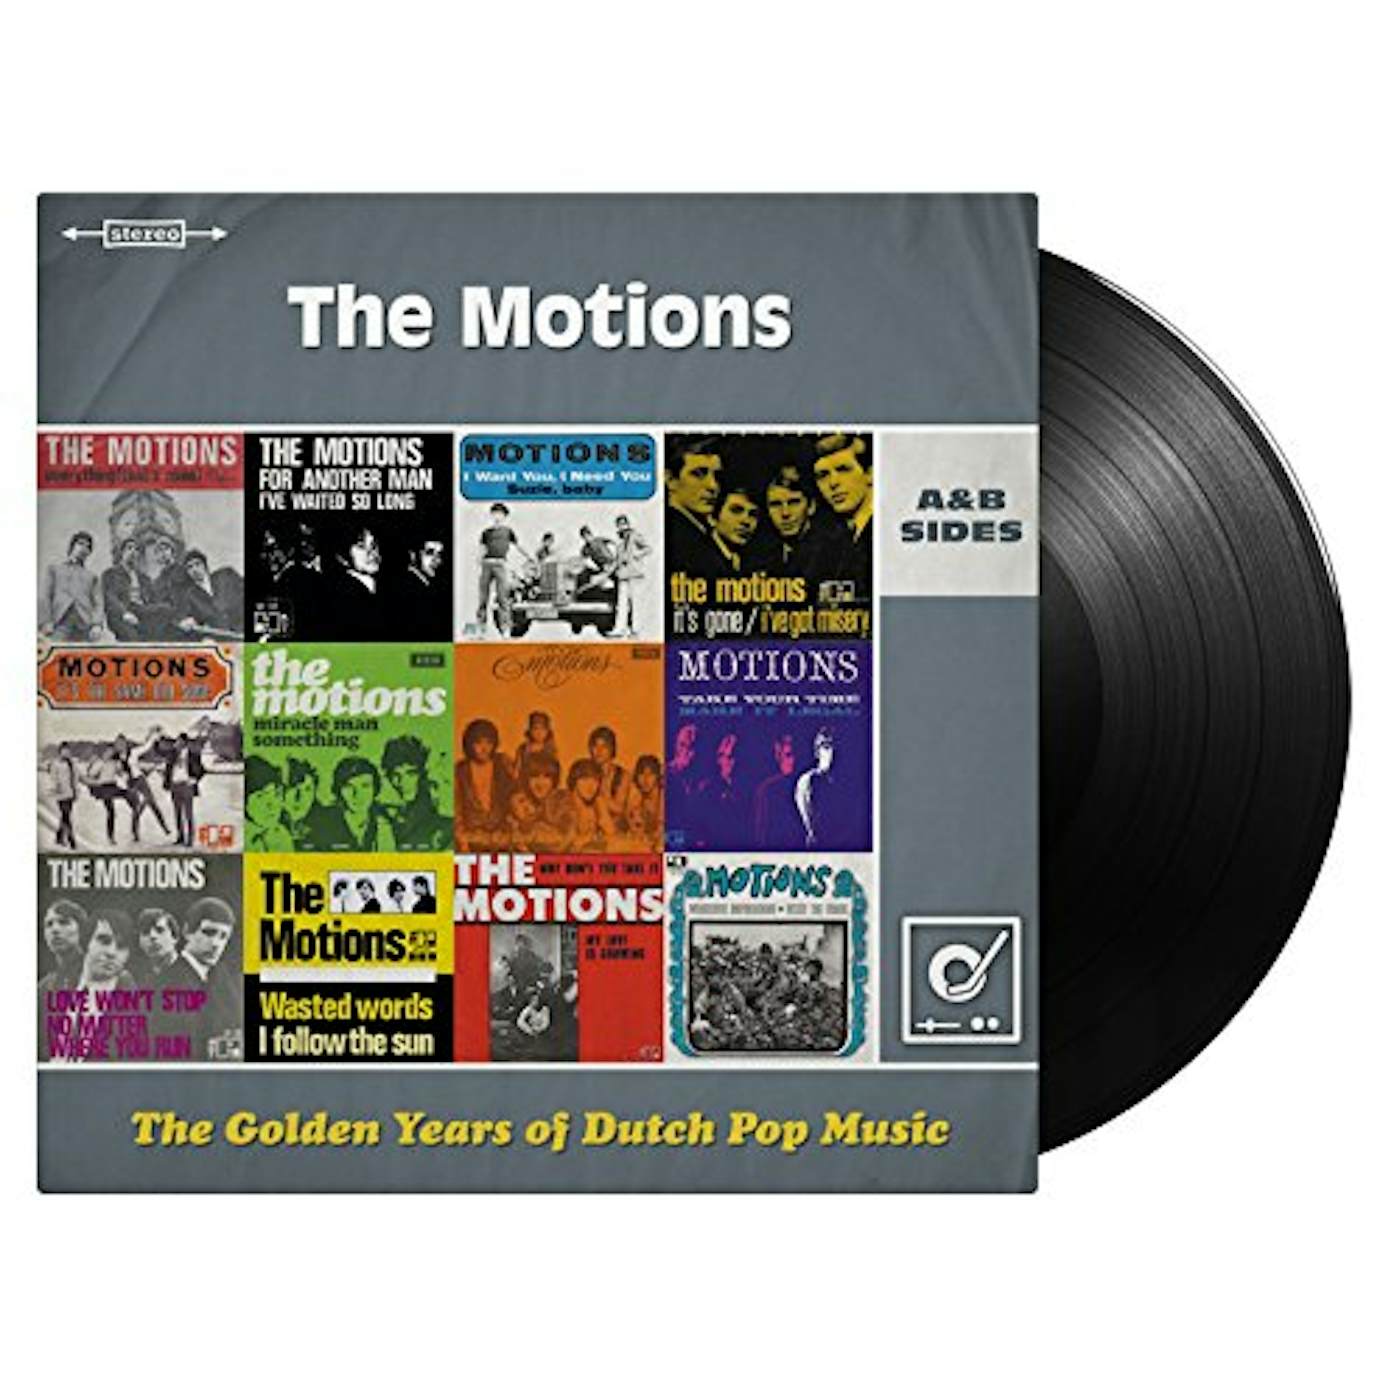 Motions A & B SIDES: GOLDEN YEARS OF DUTCH POP MUSIC (REMASTERED/180G) Vinyl Record